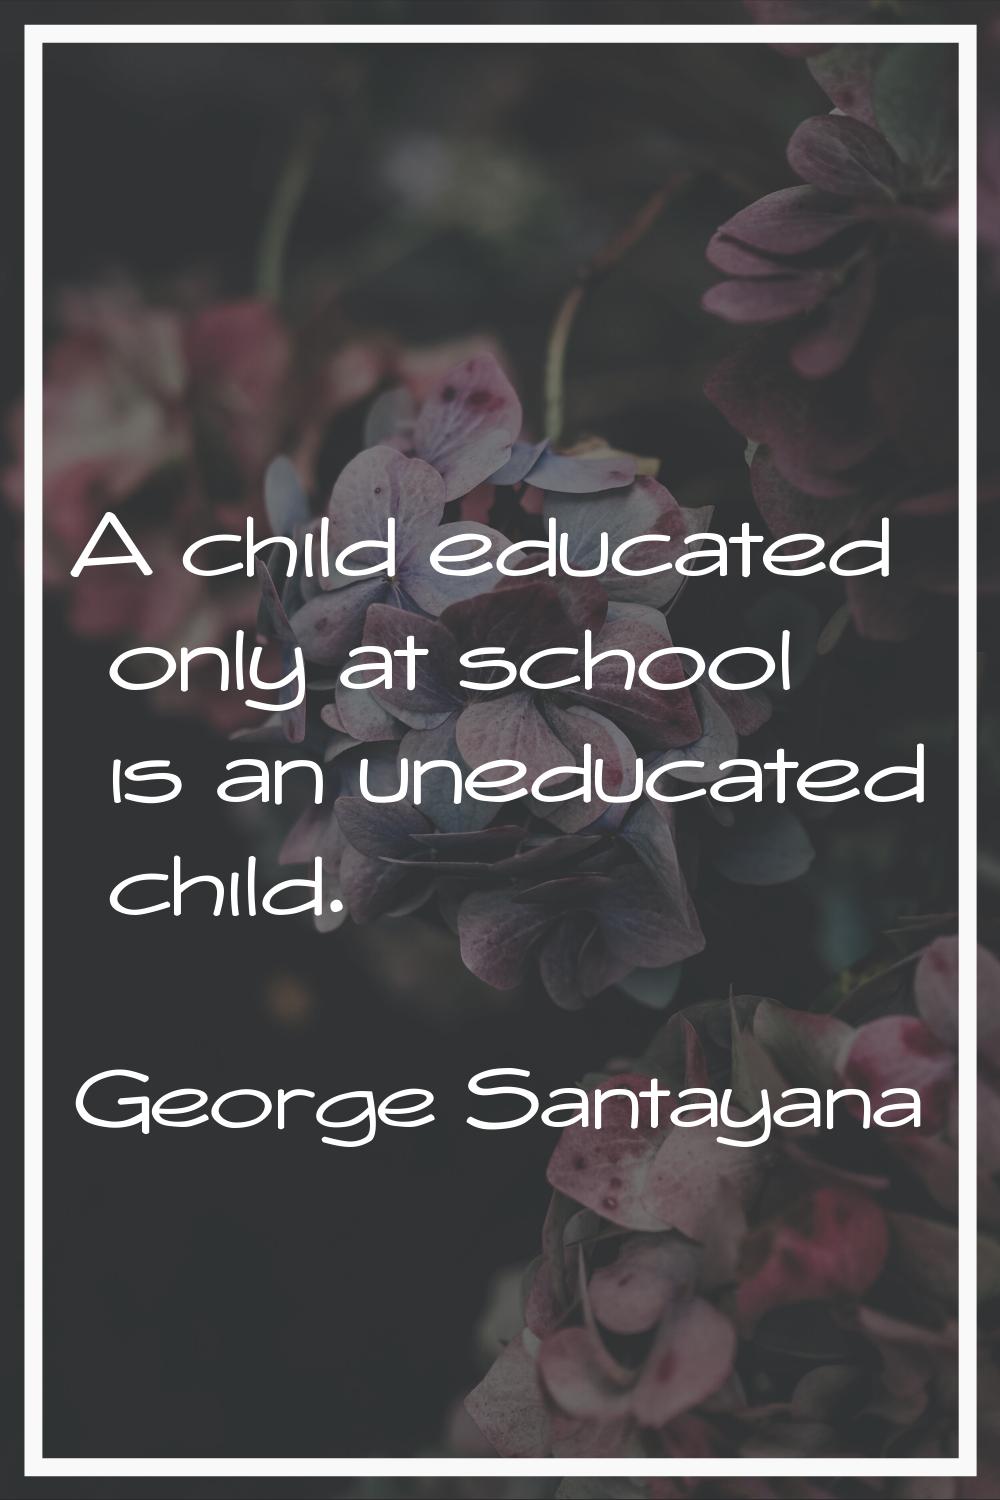 A child educated only at school is an uneducated child.